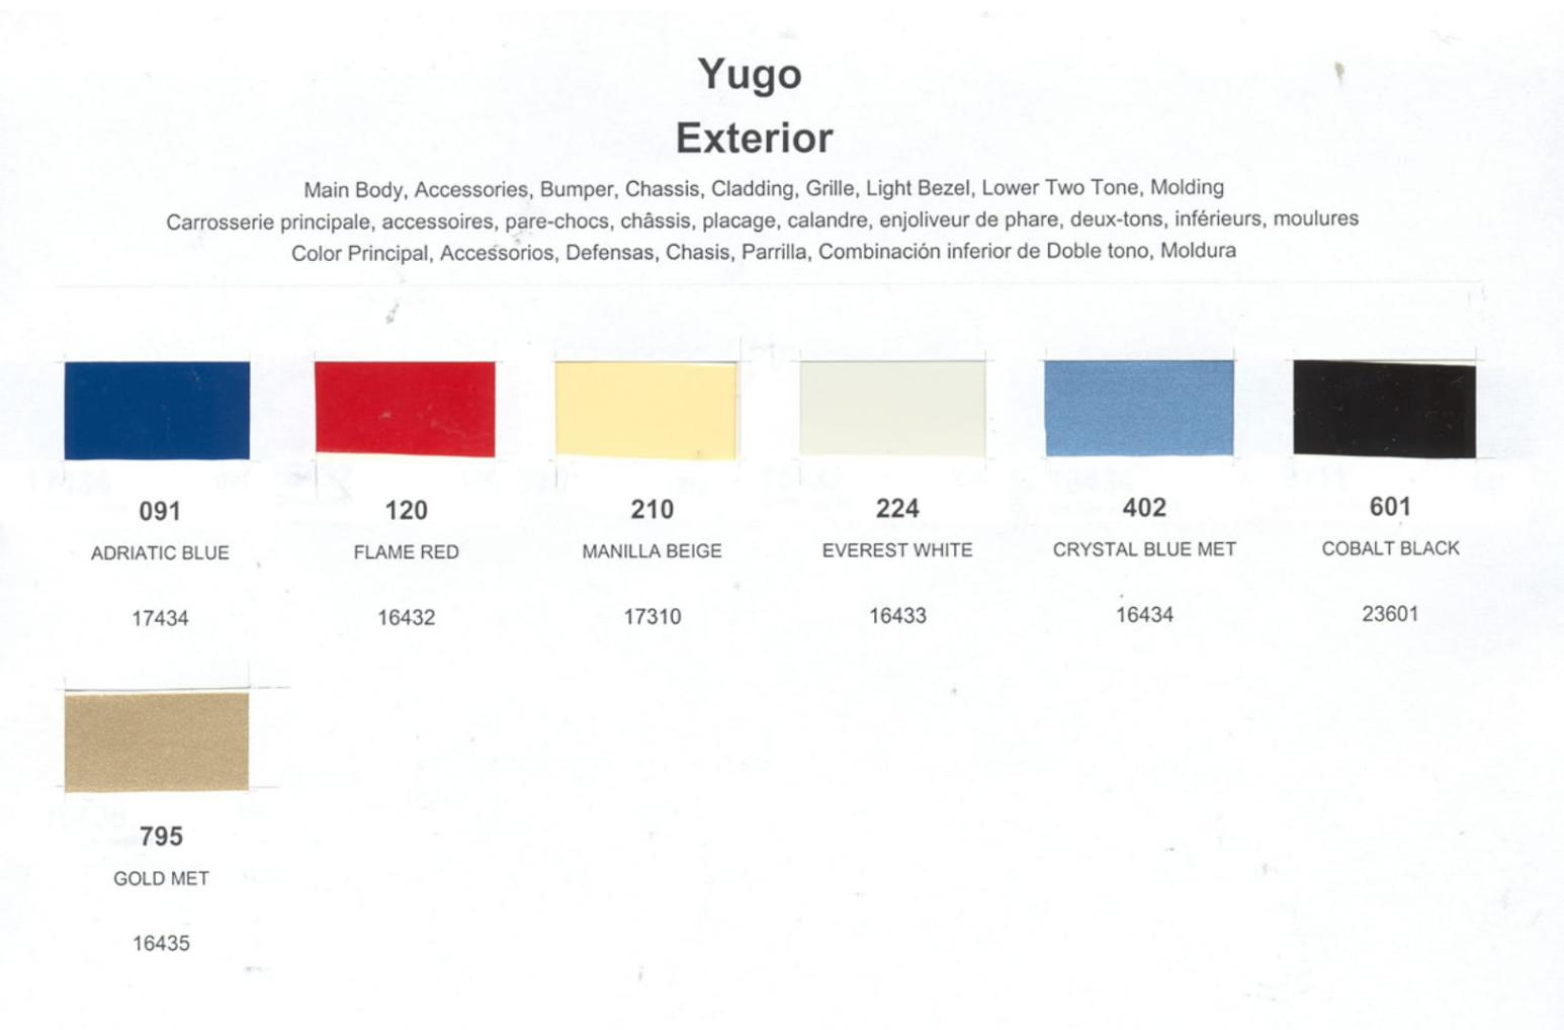 Exterior Colors and their paint codes used on Yugo in 1986